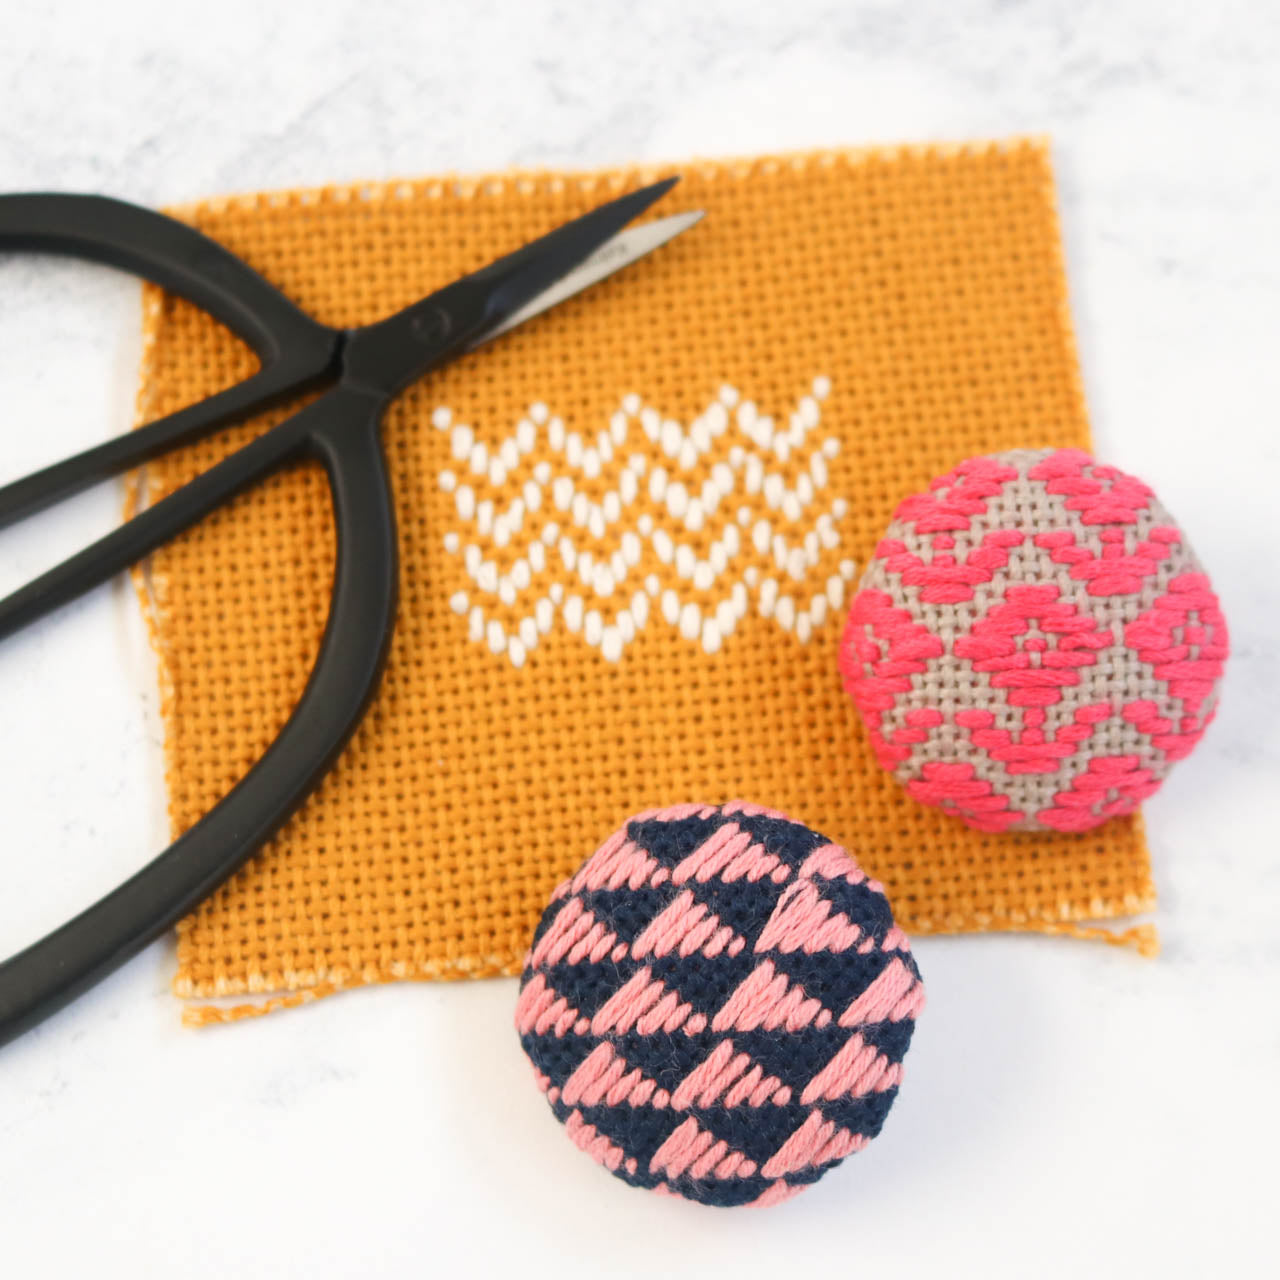 Kogin Embroidery Covered Button Kit - Geometric Set 3 - Stitched Modern